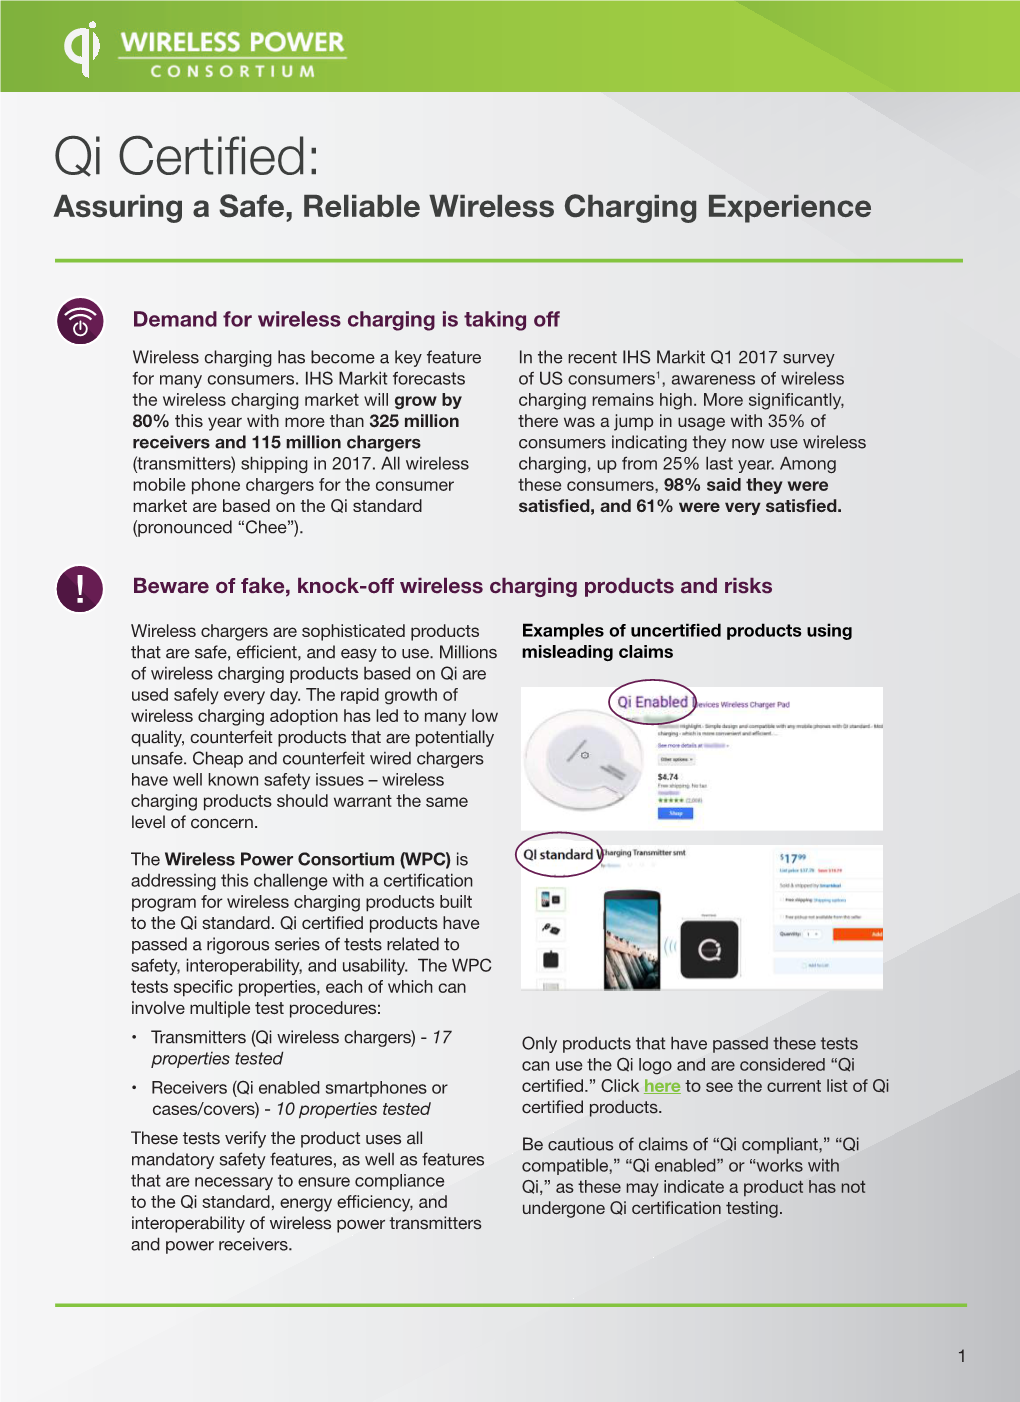 Qi Certified: Assuring a Safe, Reliable Wireless Charging Experience